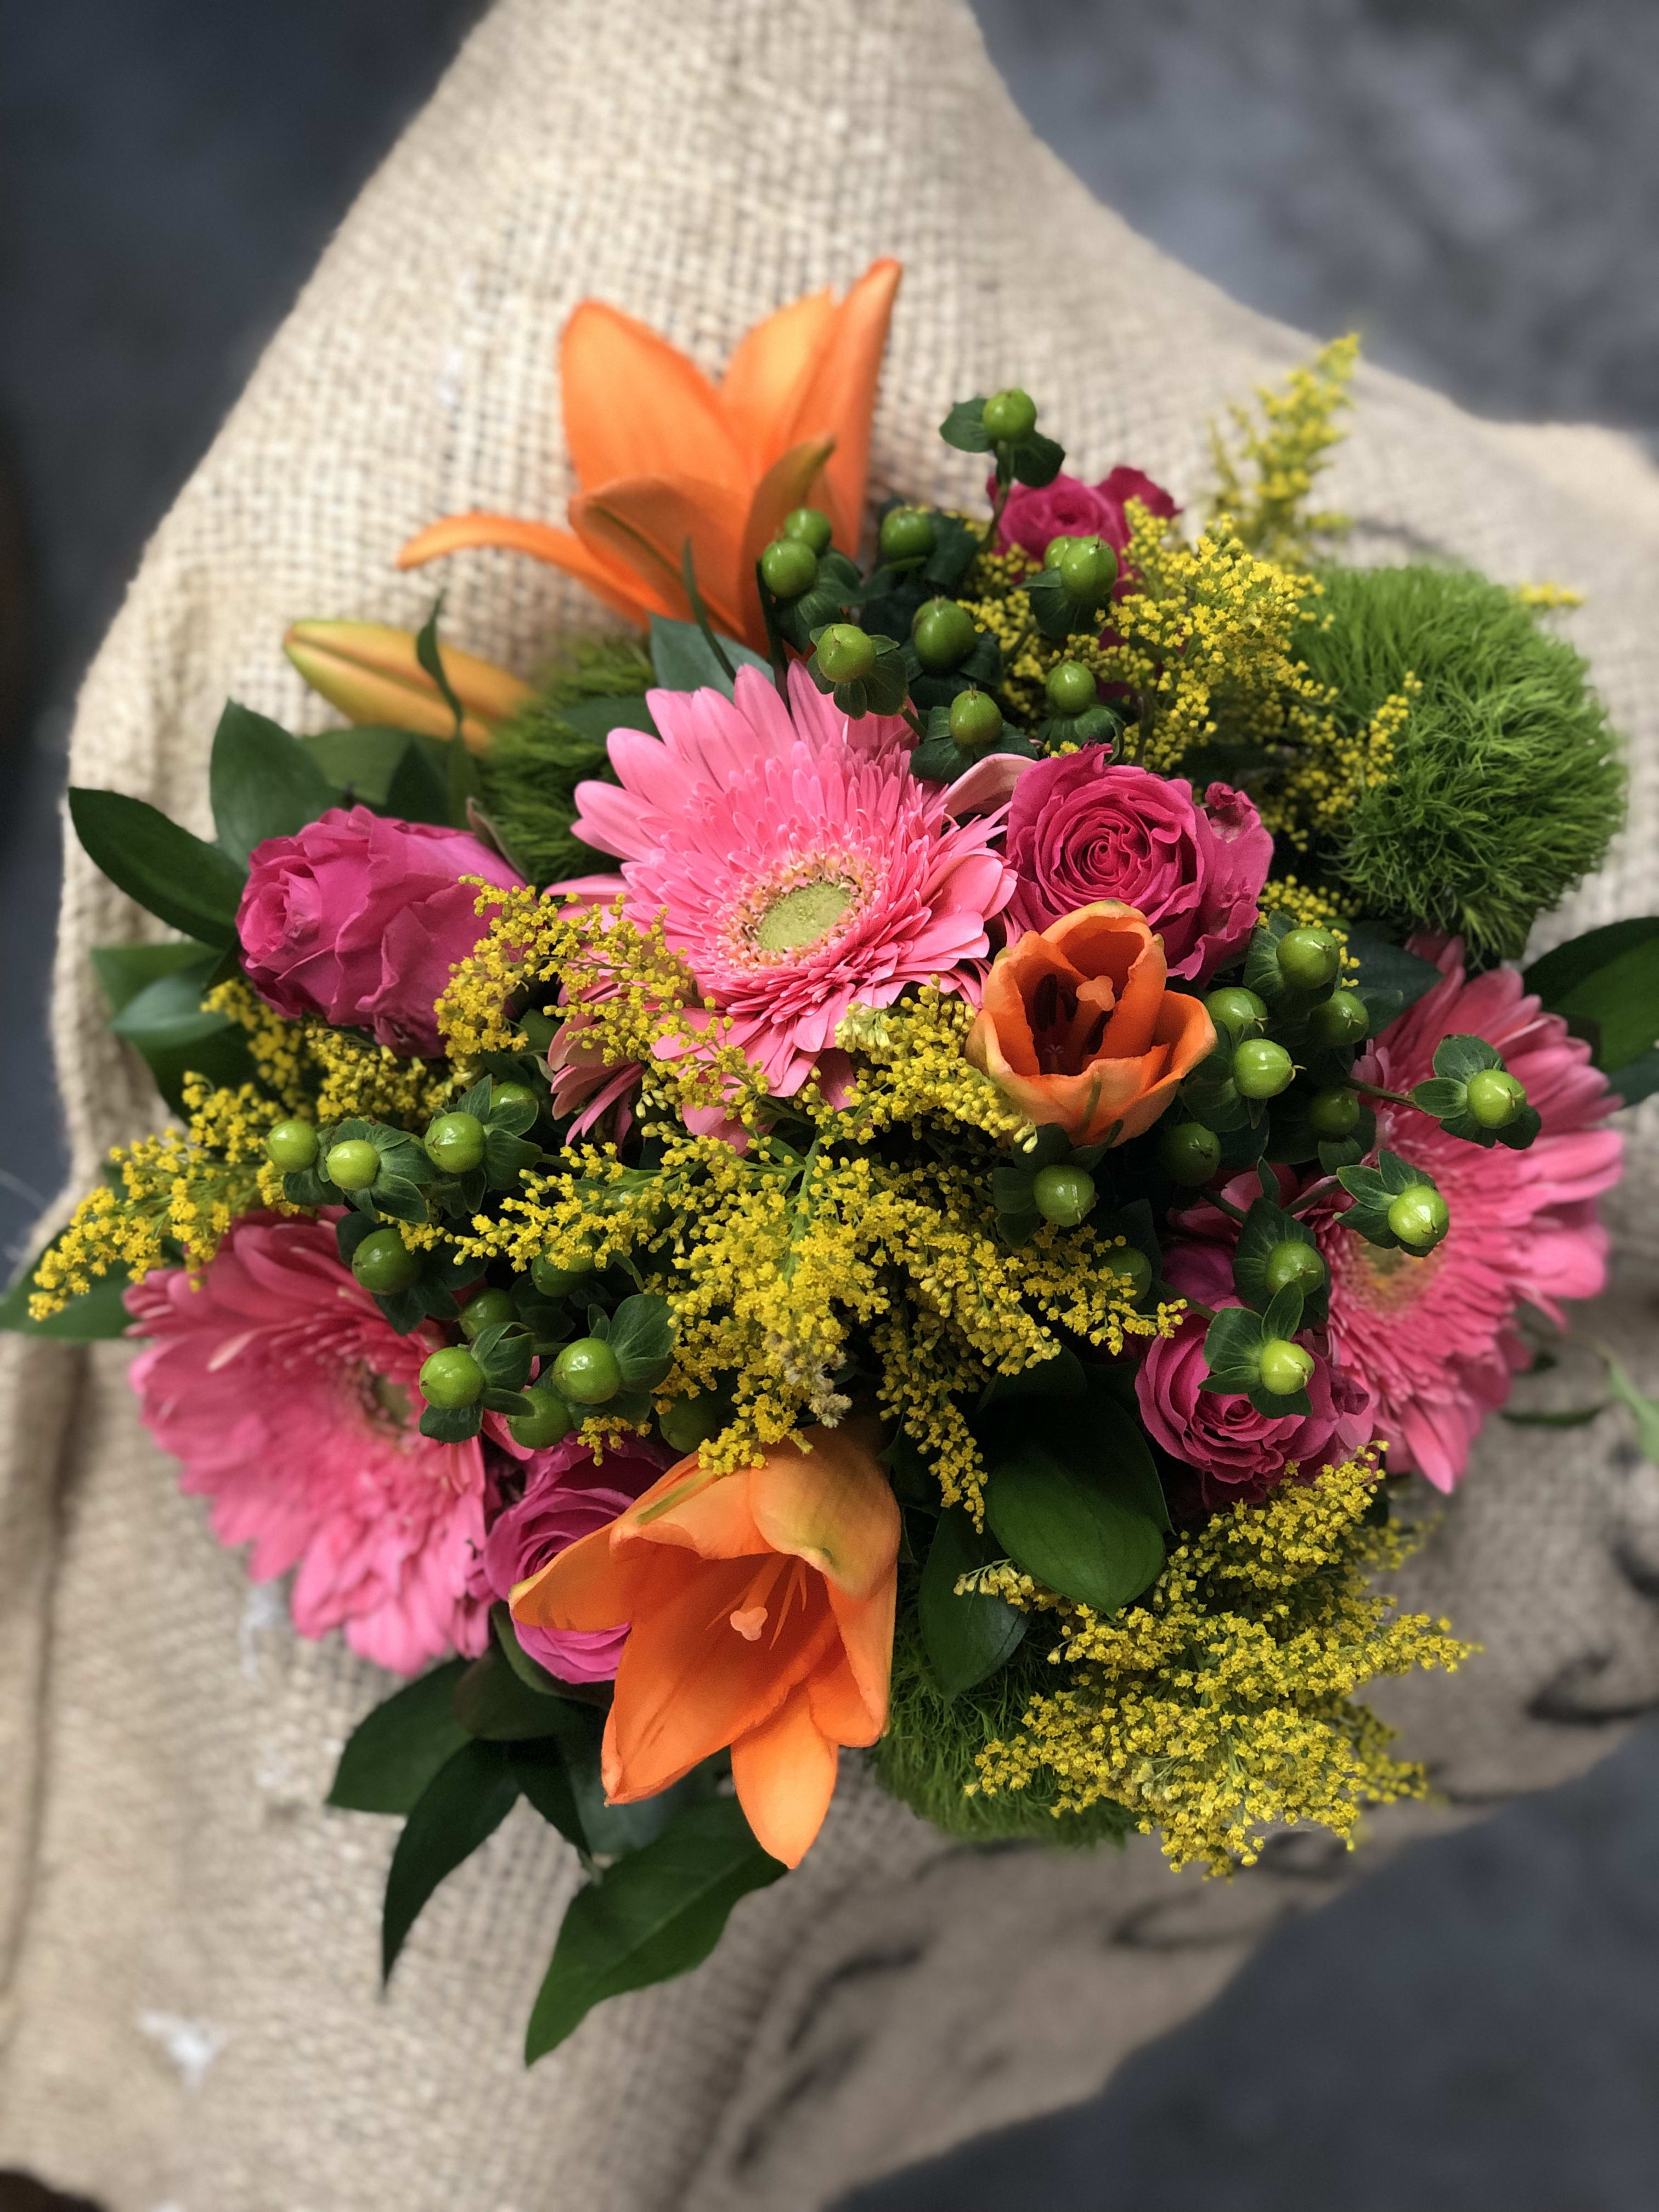 WRAP- Celebrate Today! - This beautifully designed hand wrapped bouquet is filled with happy flowers like pink roses, gerbera daisies, and bright orange asiatic lilies accented by green berries and other mixed flowers.  The wrapped bouquet comes delivered in a flower caddie with water for transport.  We call this bouquet - Vase Ready - all you need is a nice glass vase to drop the flowers in!